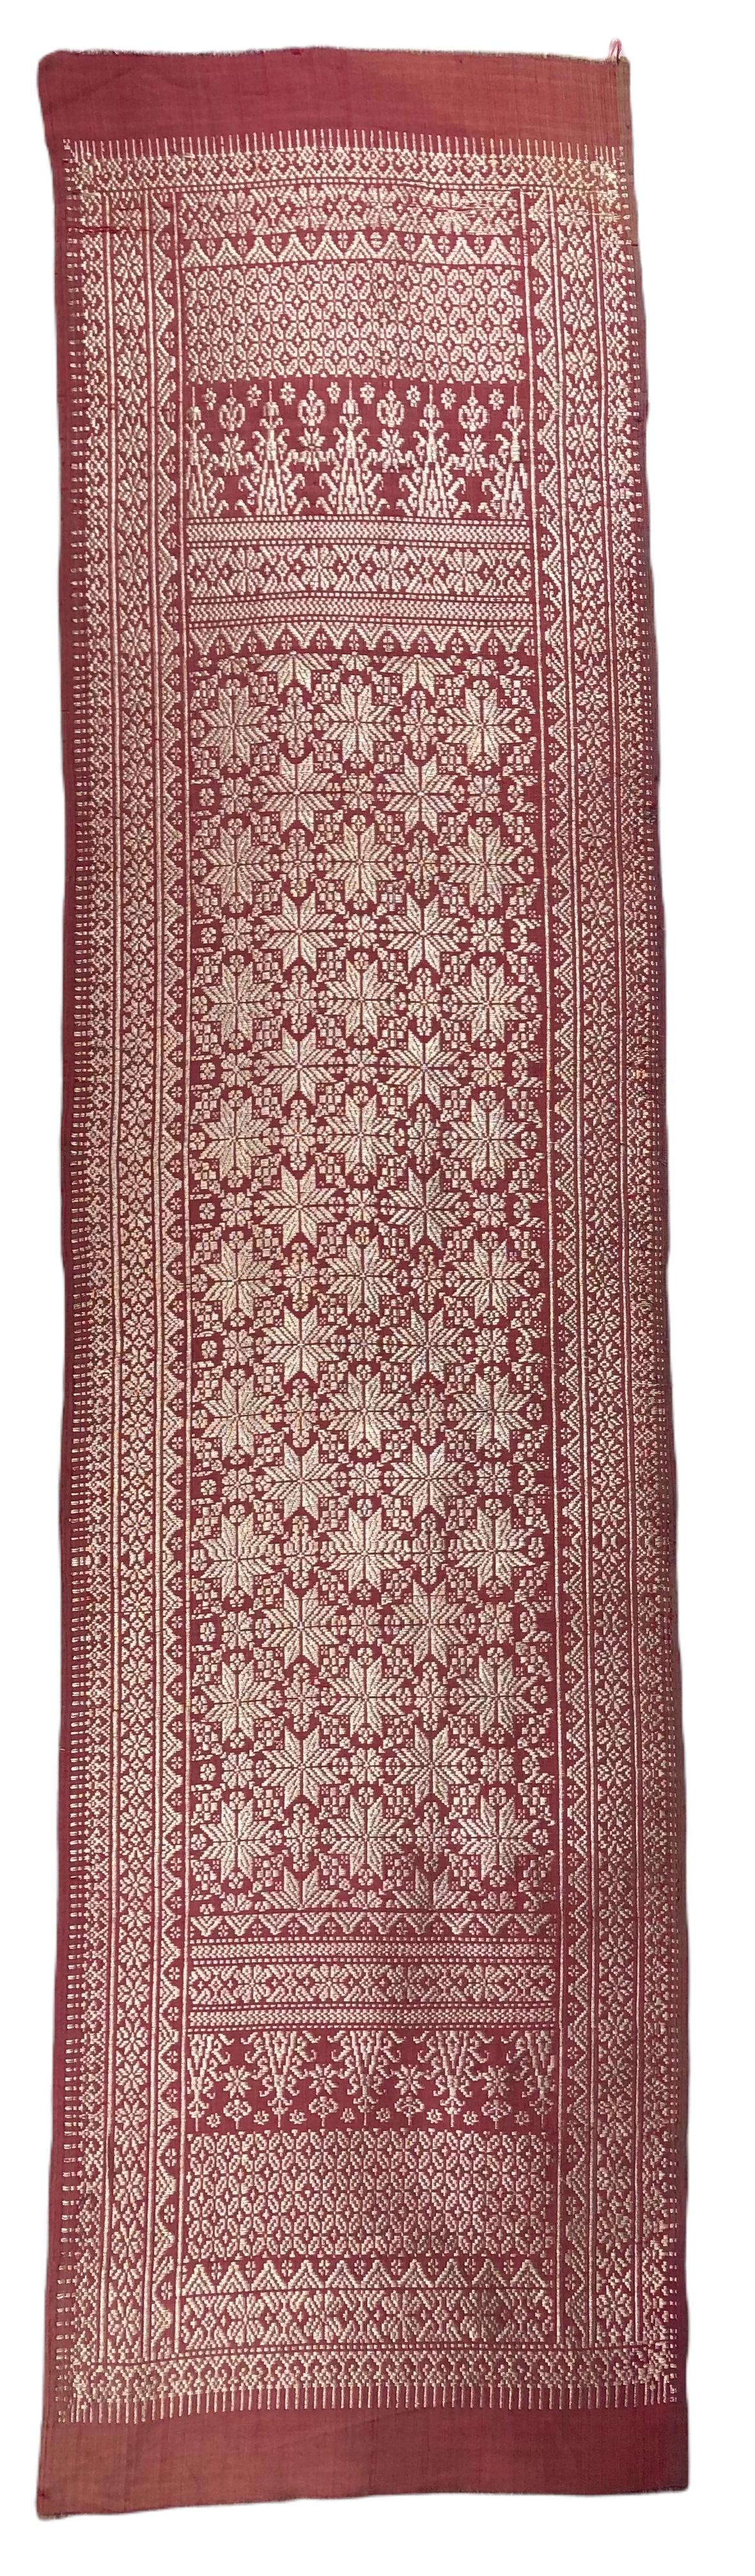 Hand-Knotted Kashmir Red and Gold Paisley Pattern Silk Table Runner